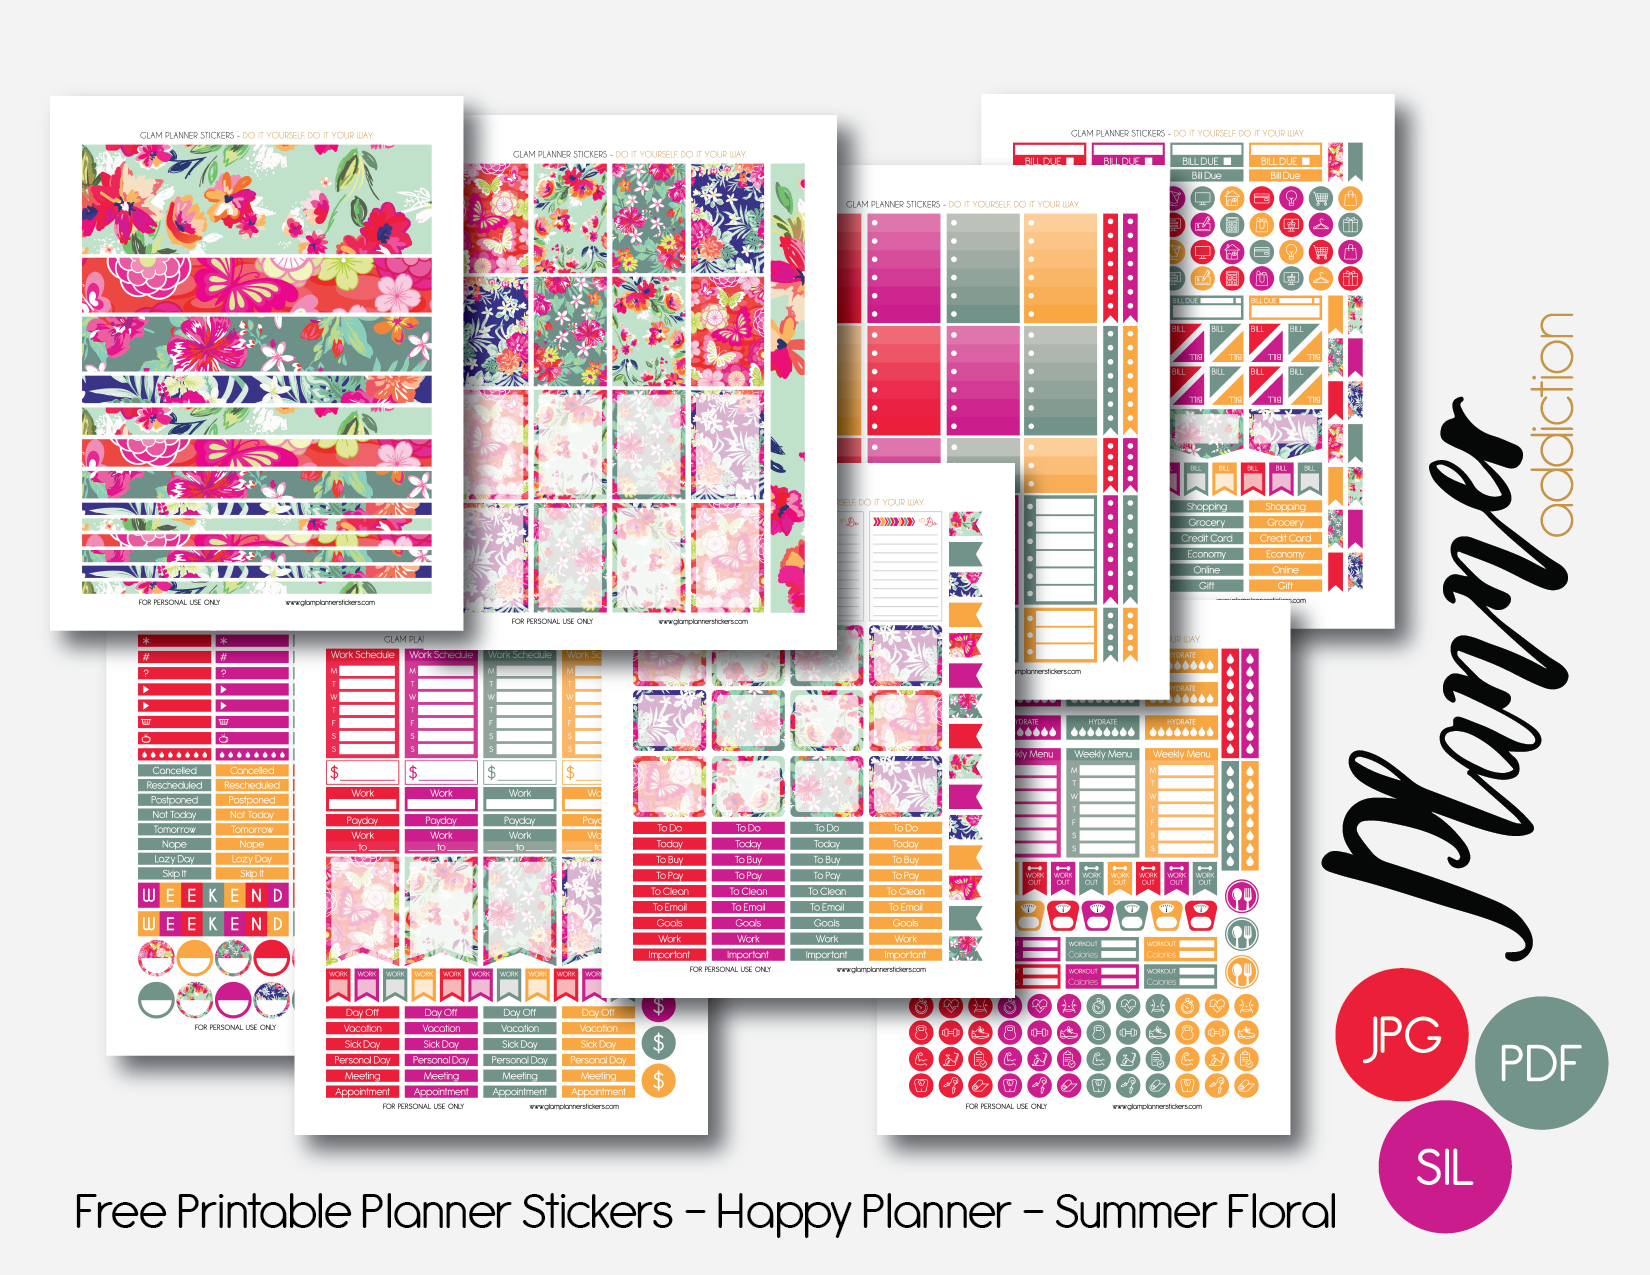 Free Printable Planner Stickers – Planner Addiction - Happy Planner Free Printable Stickers